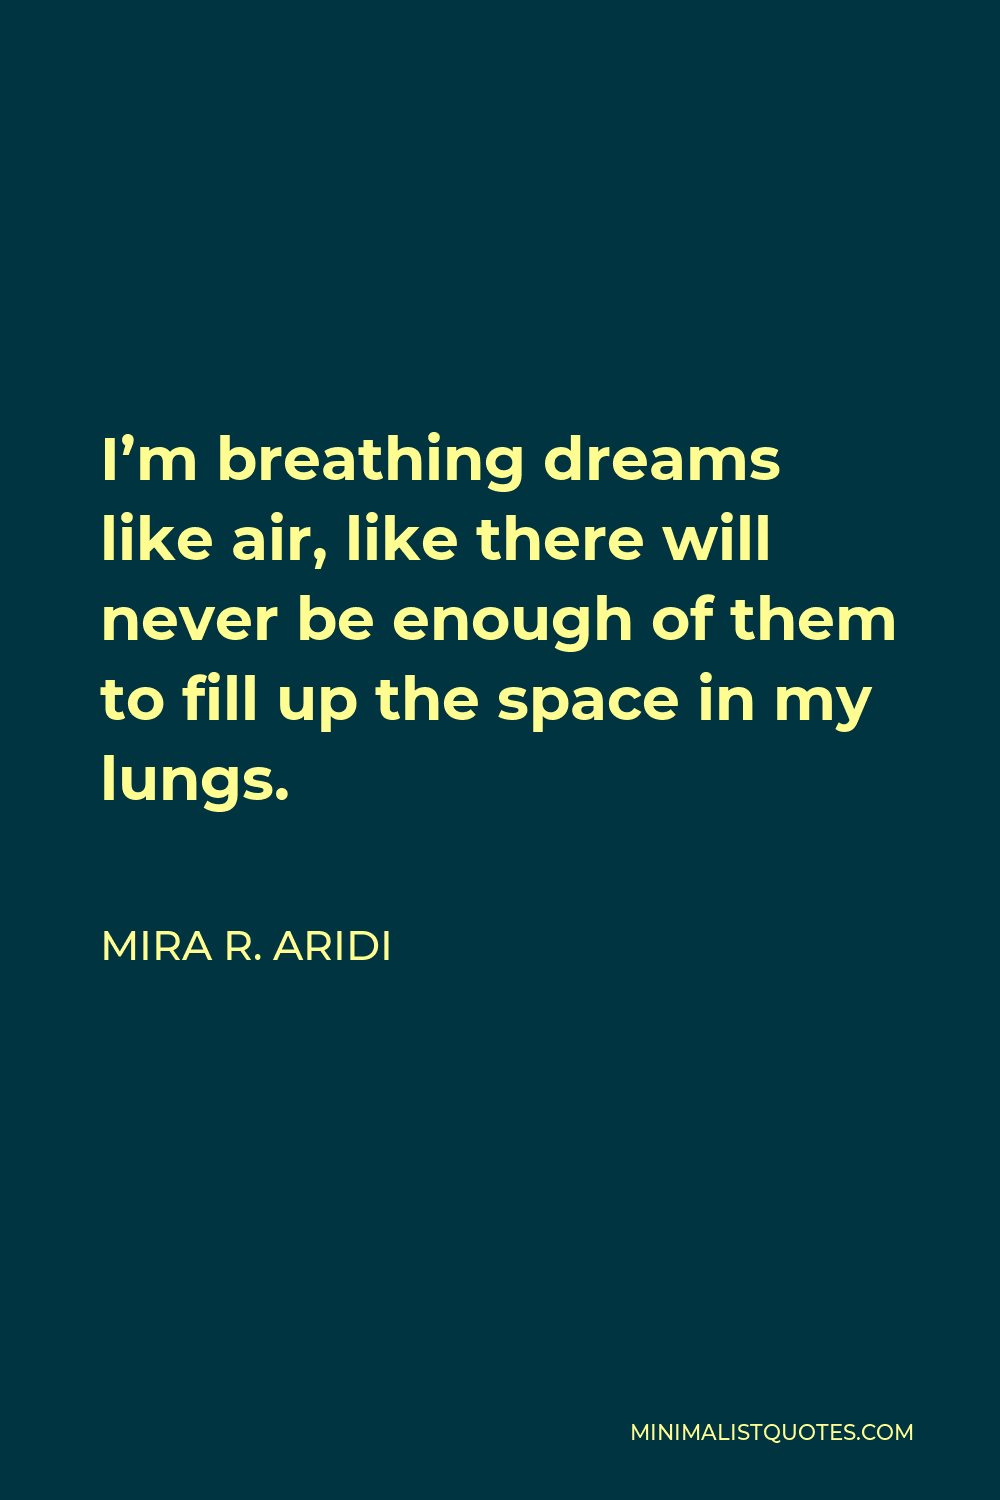 Mira R. Aridi Quote - I’m breathing dreams like air, like there will never be enough of them to fill up the space in my lungs.